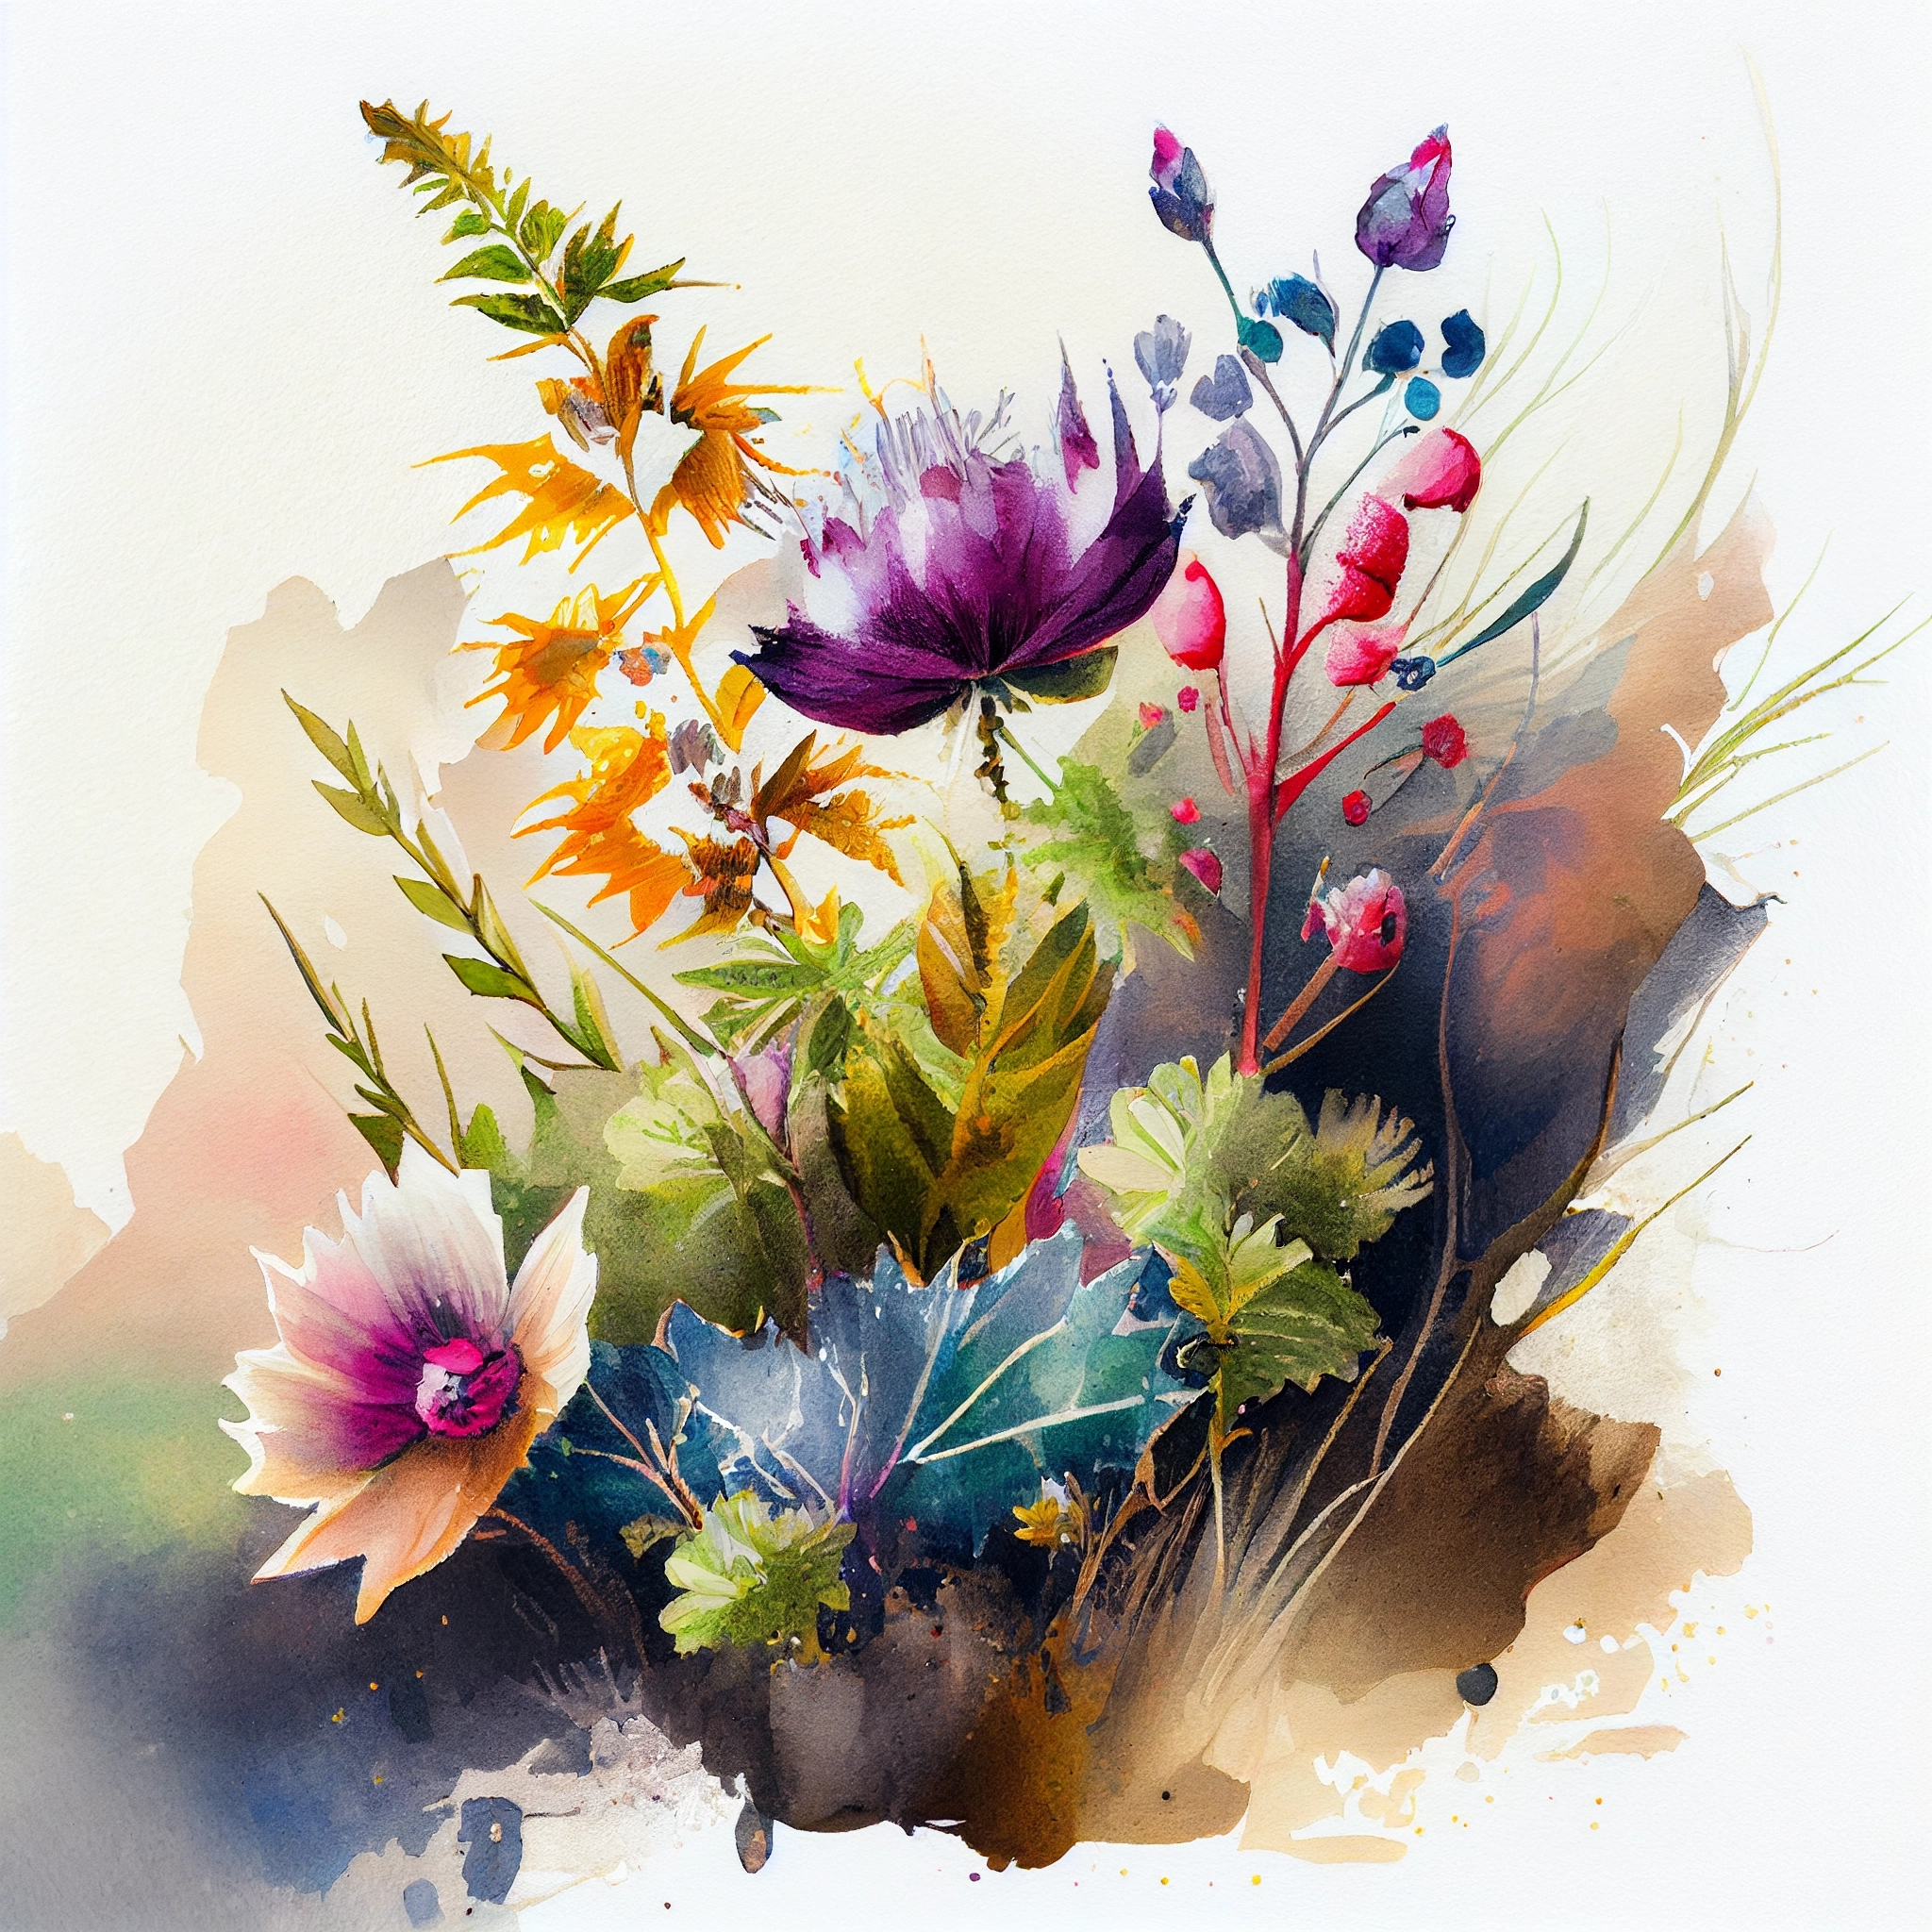 Bring Nature Indoors with our Stunning Wild Flowers Art Print - Perfect for Enhancing Your Home or Office Decor!